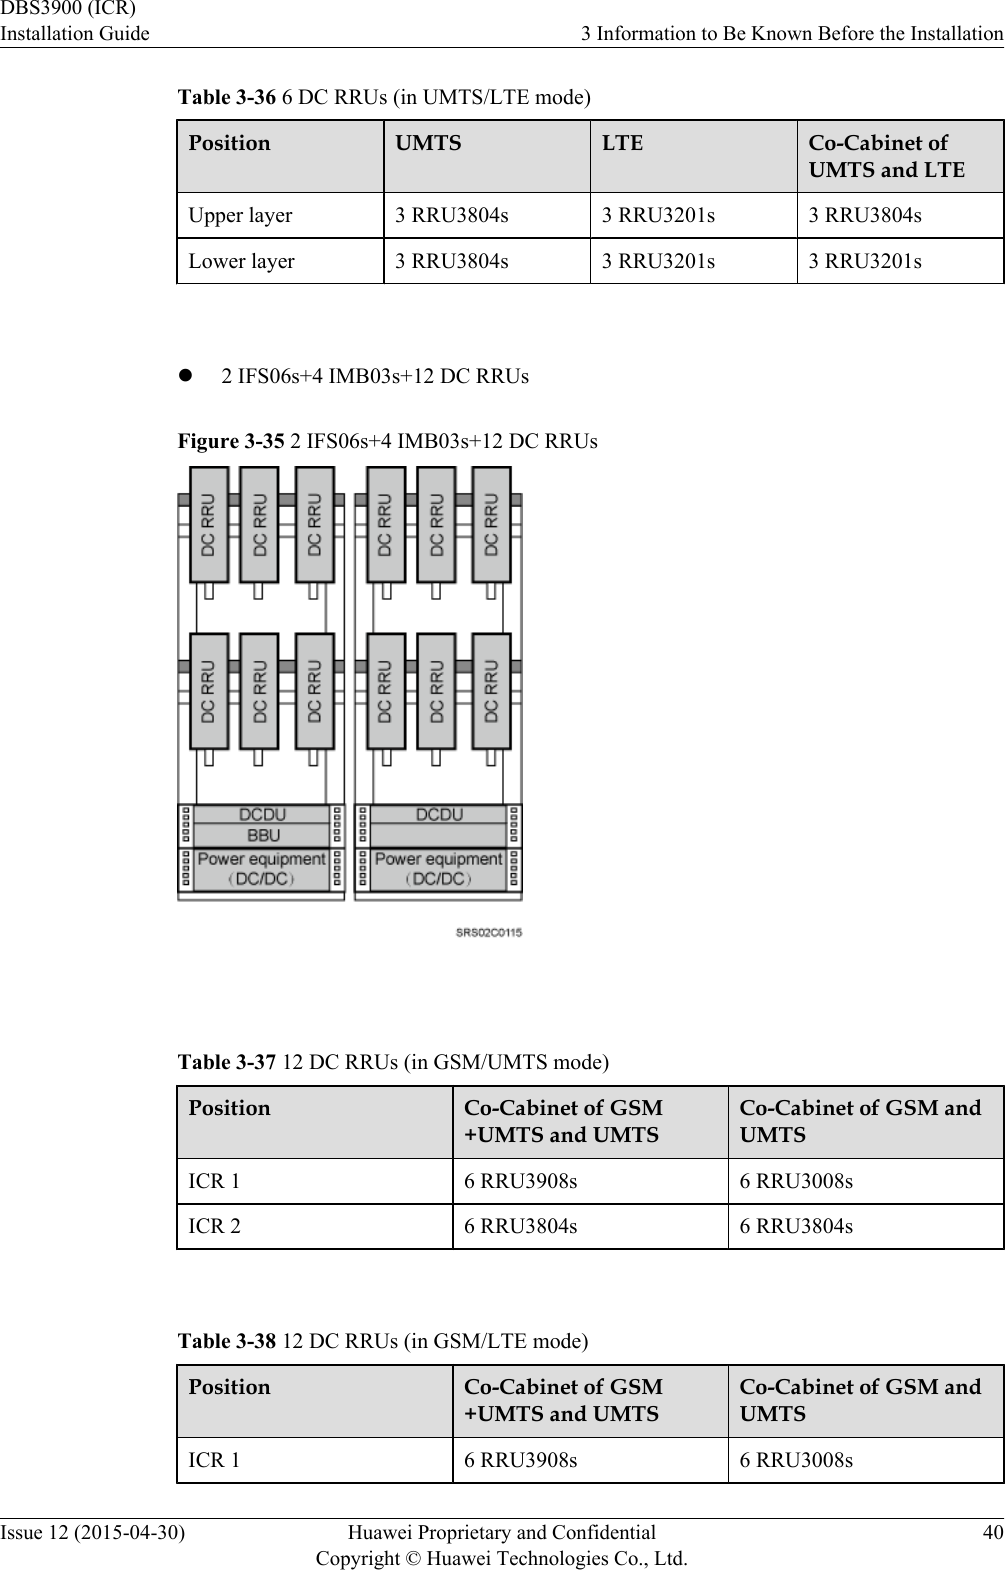 Table 3-36 6 DC RRUs (in UMTS/LTE mode)Position UMTS LTE Co-Cabinet ofUMTS and LTEUpper layer 3 RRU3804s 3 RRU3201s 3 RRU3804sLower layer 3 RRU3804s 3 RRU3201s 3 RRU3201s l2 IFS06s+4 IMB03s+12 DC RRUsFigure 3-35 2 IFS06s+4 IMB03s+12 DC RRUs Table 3-37 12 DC RRUs (in GSM/UMTS mode)Position Co-Cabinet of GSM+UMTS and UMTSCo-Cabinet of GSM andUMTSICR 1 6 RRU3908s 6 RRU3008sICR 2 6 RRU3804s 6 RRU3804s Table 3-38 12 DC RRUs (in GSM/LTE mode)Position Co-Cabinet of GSM+UMTS and UMTSCo-Cabinet of GSM andUMTSICR 1 6 RRU3908s 6 RRU3008sDBS3900 (ICR)Installation Guide 3 Information to Be Known Before the InstallationIssue 12 (2015-04-30) Huawei Proprietary and ConfidentialCopyright © Huawei Technologies Co., Ltd.40